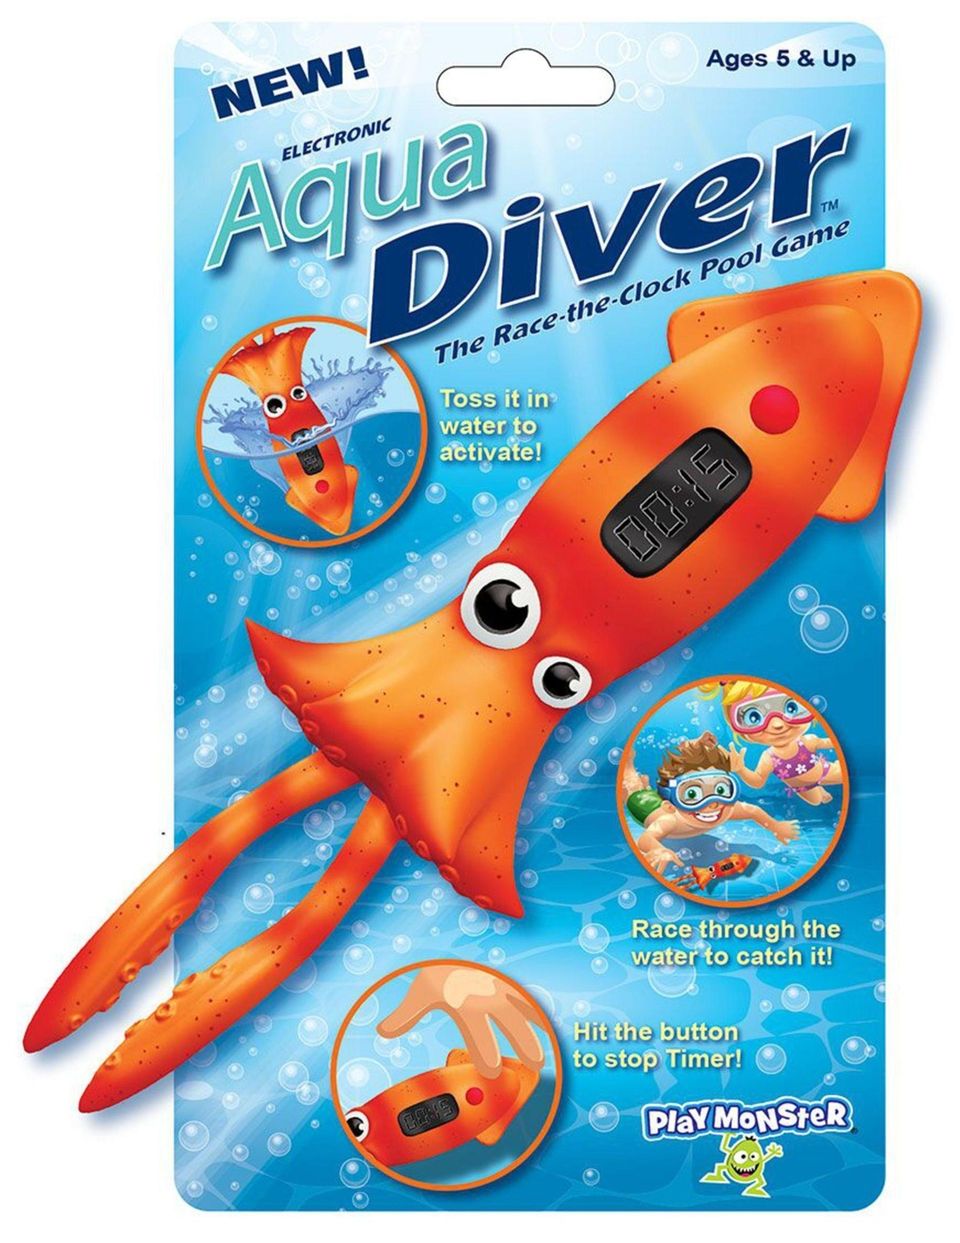 Once you toss the Aqua Diver into the